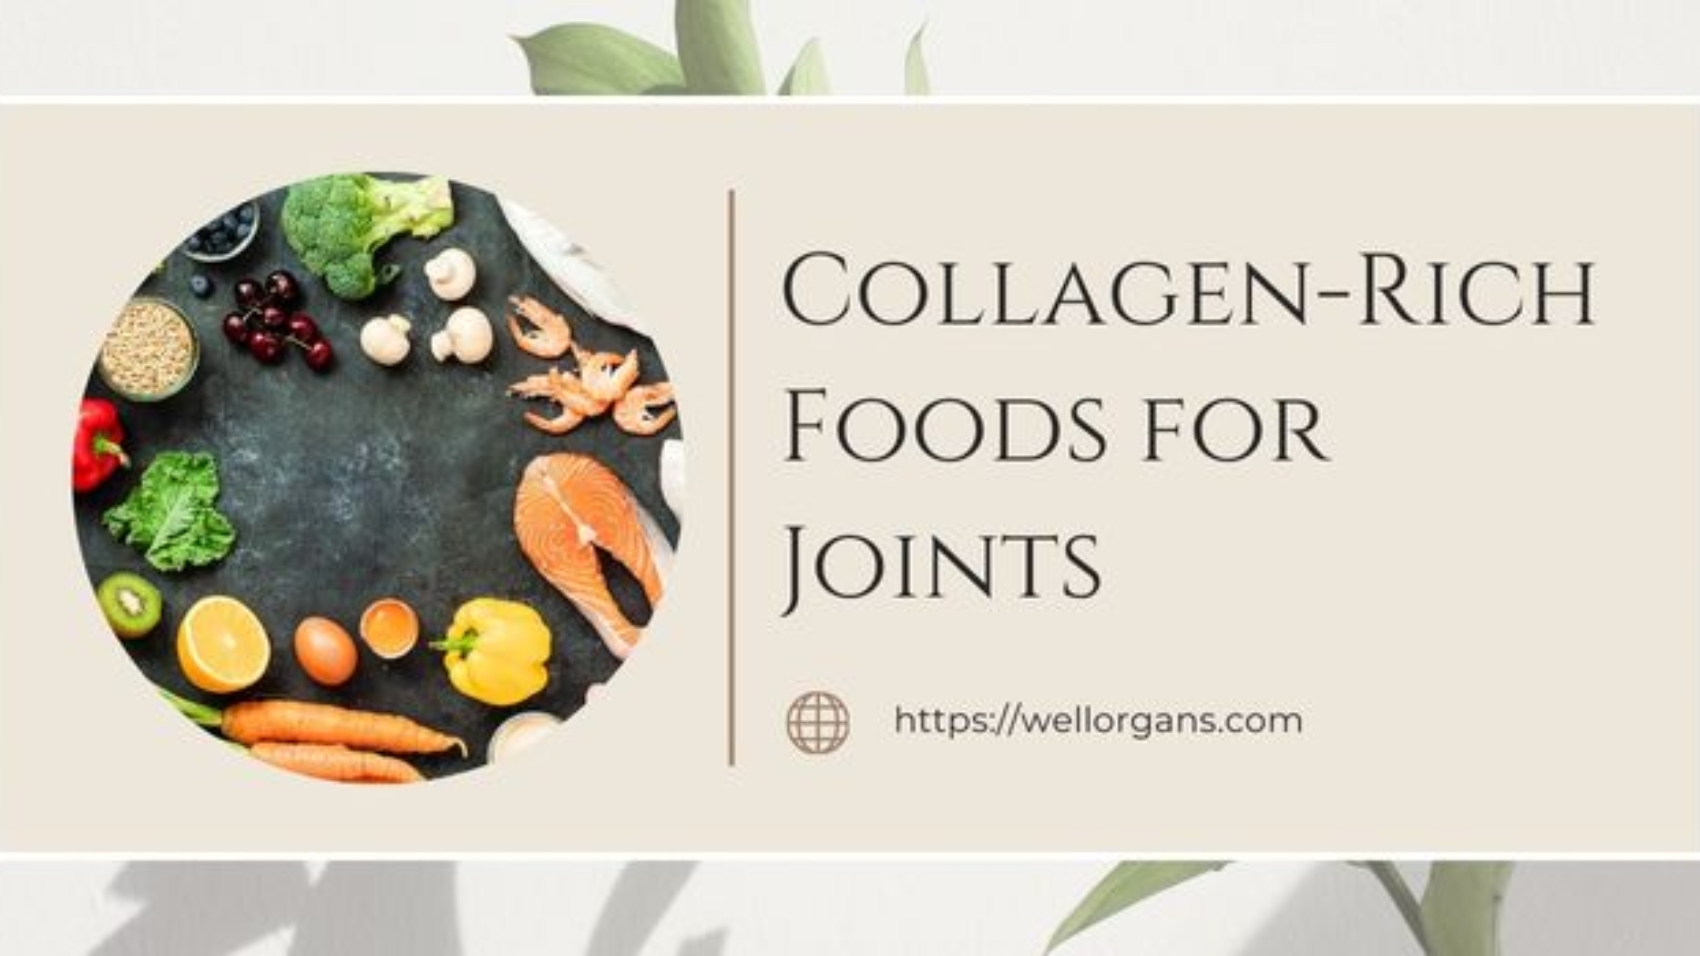 Collagen-Rich Foods for Joints